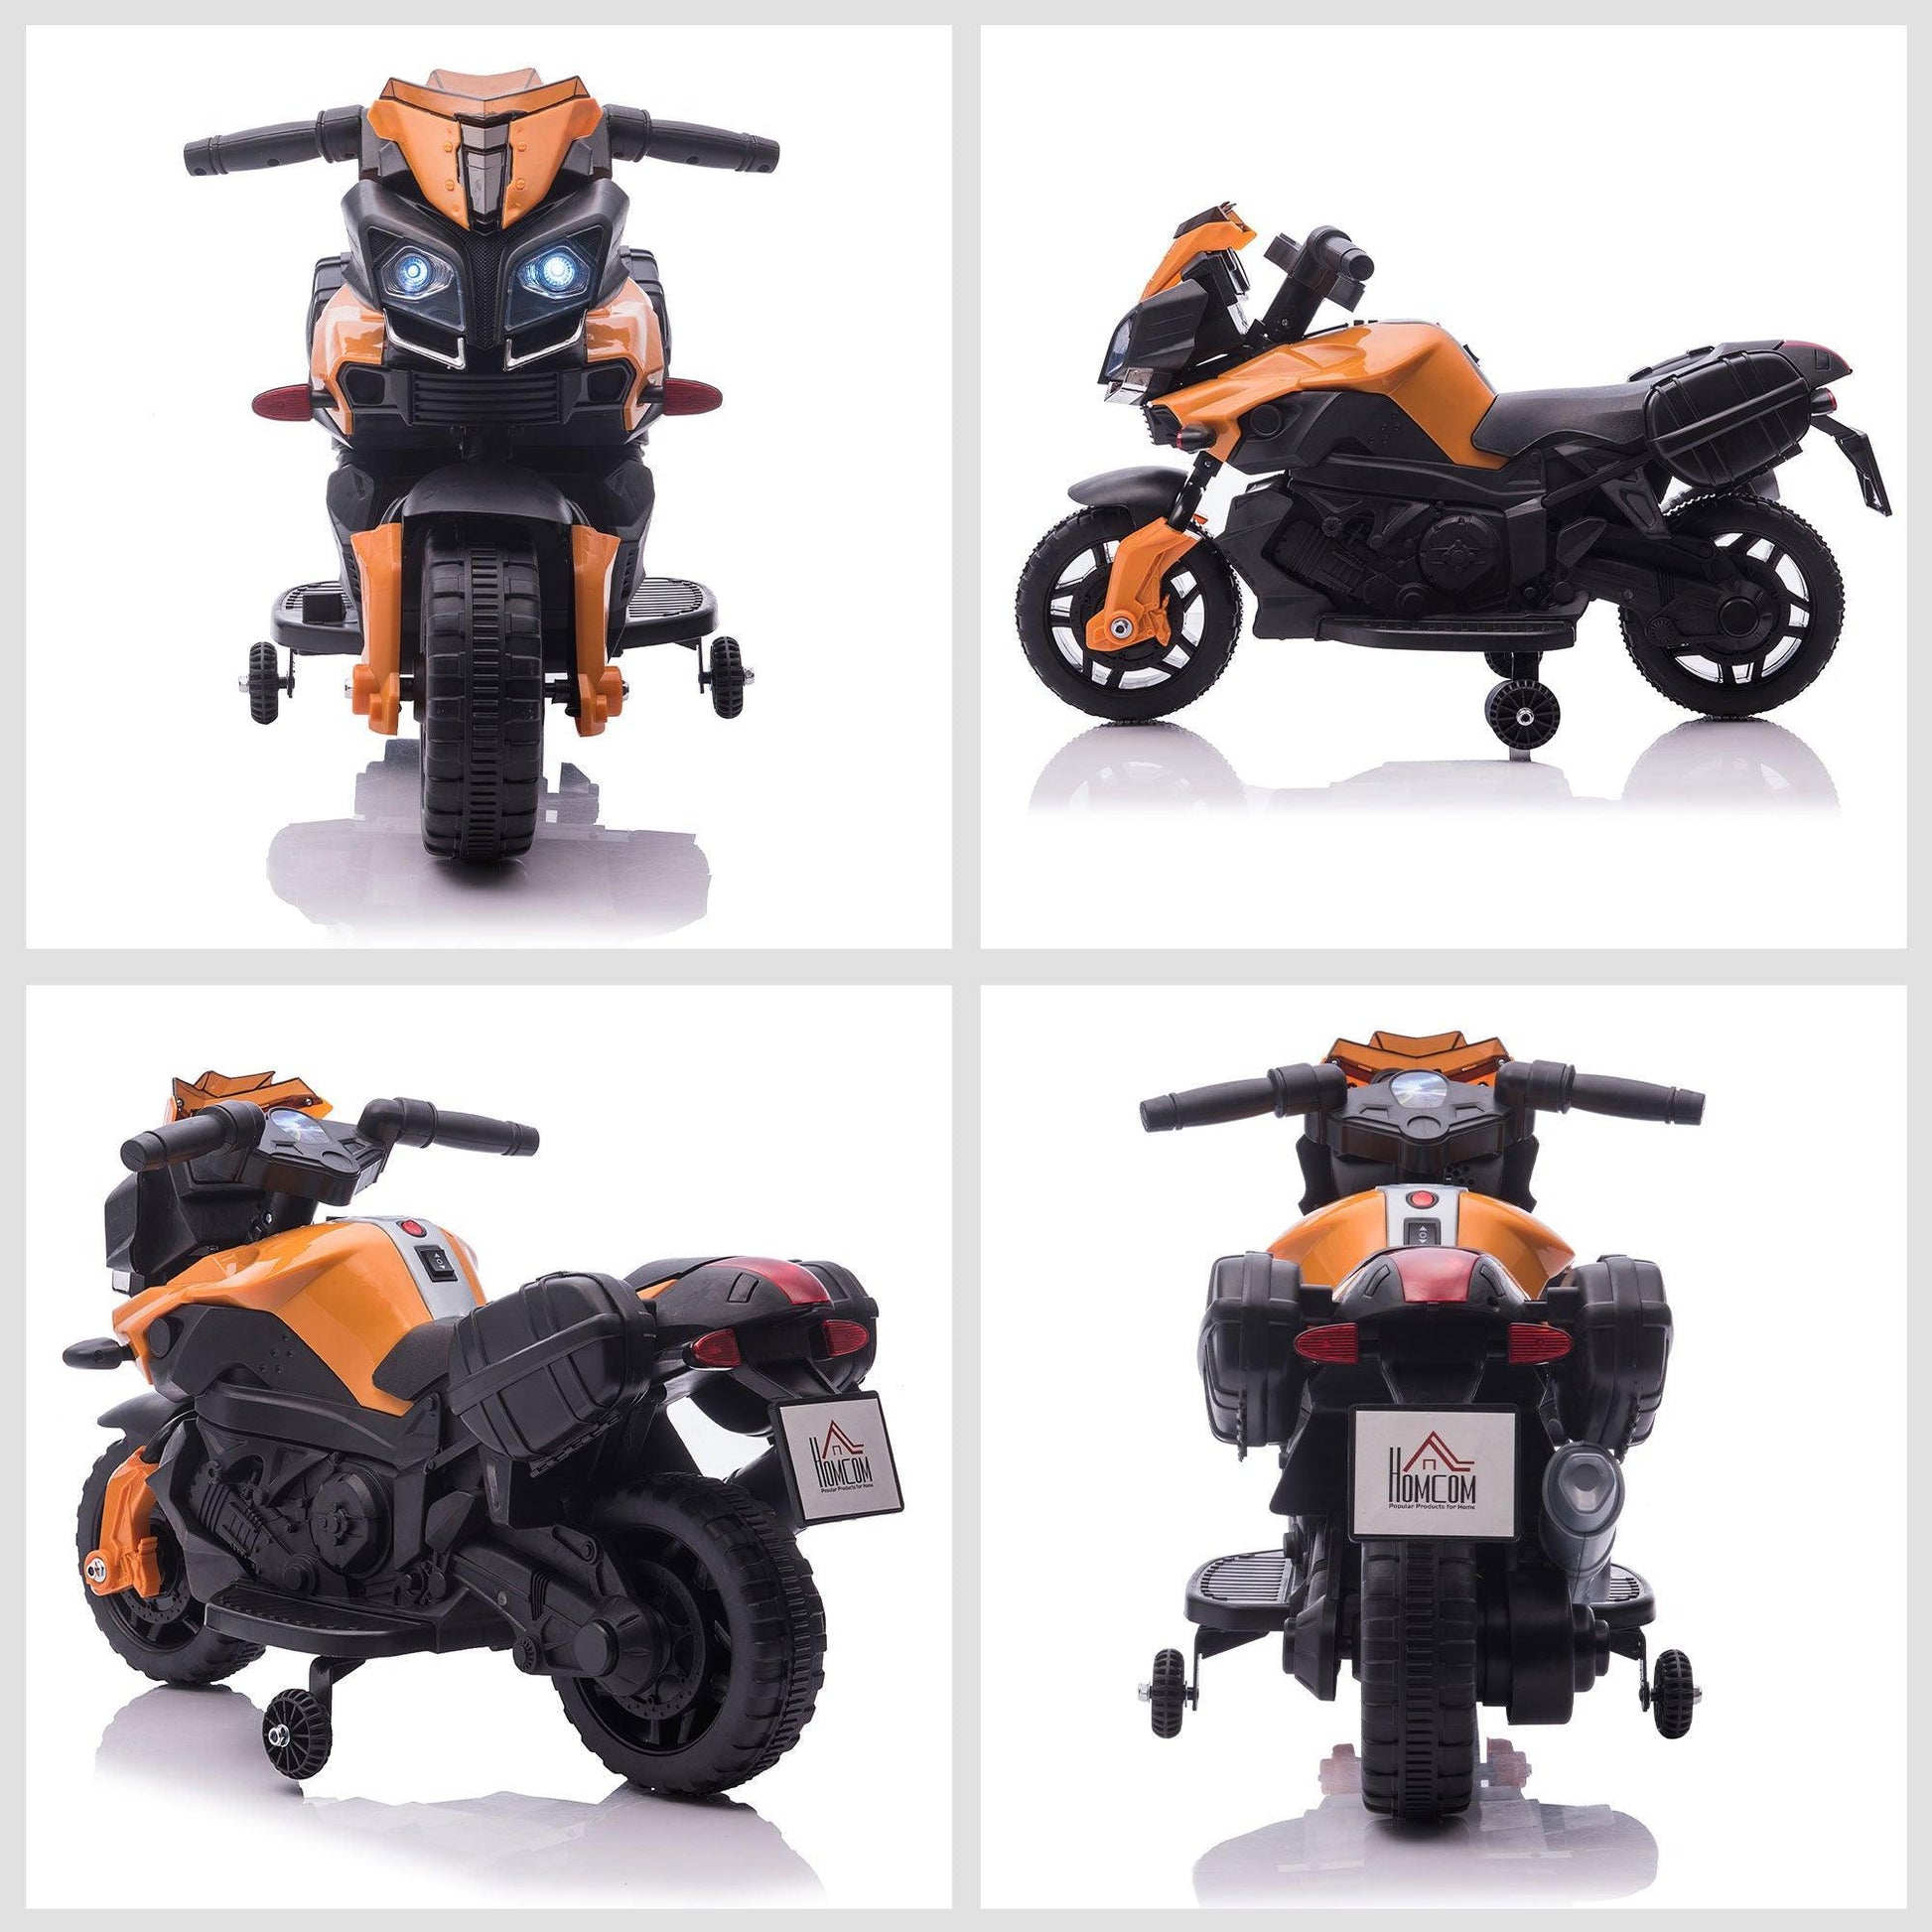 HOMCOMElectric Ride-On Motorcycle Toy for Kids - 6V, Rechargeable - ALL4U RETAILER LTD